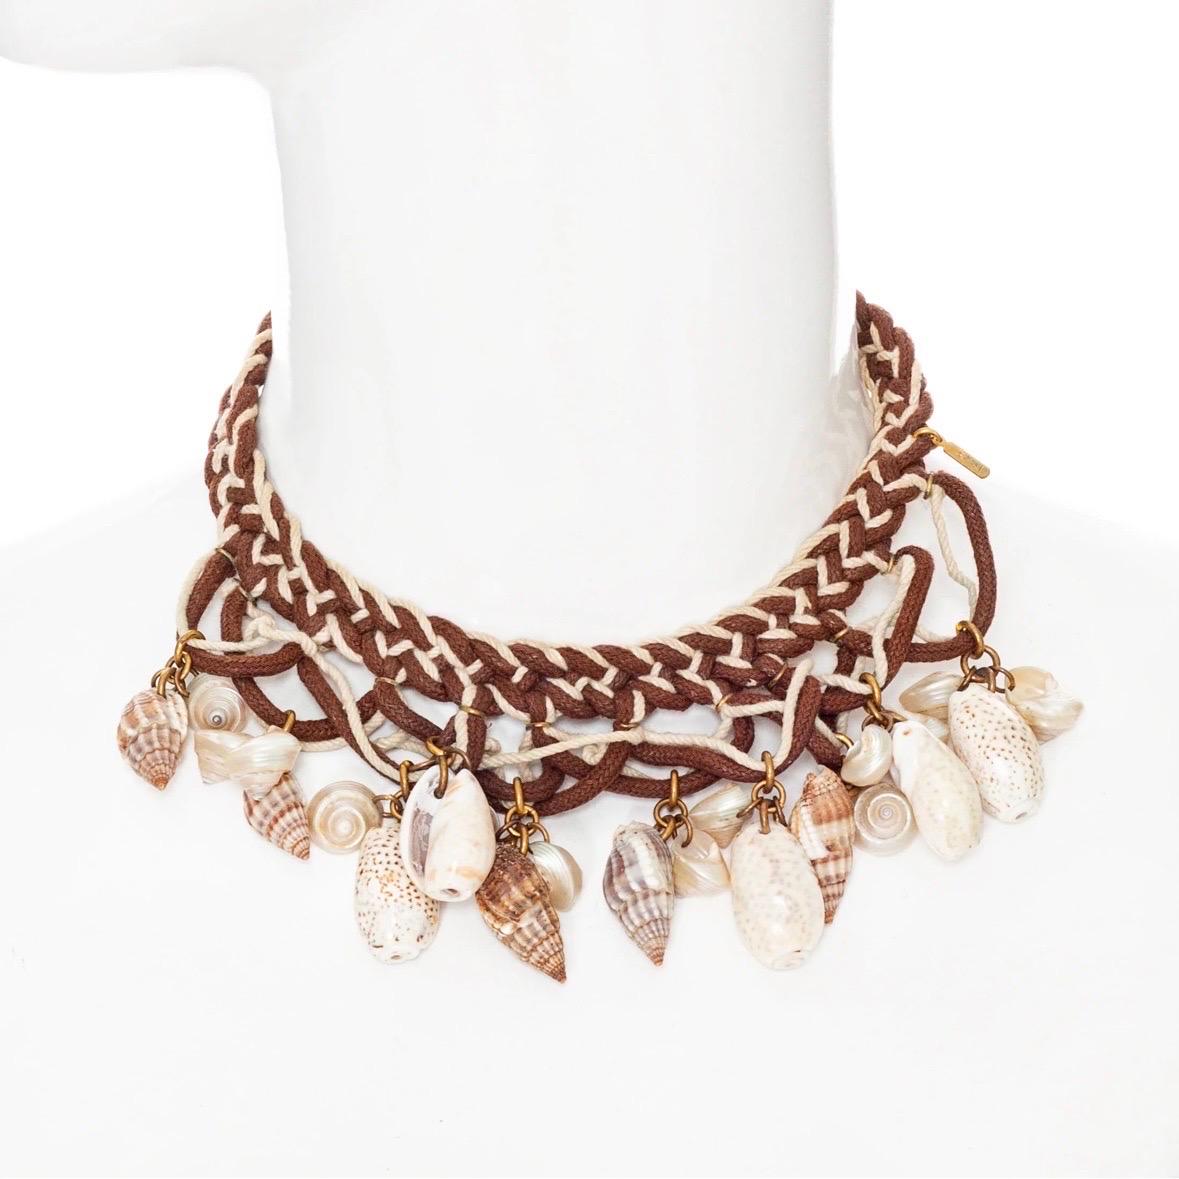 Yves Saint Laurent Vintage Brown and Cream Shell Necklace
Vintage; circa 1970s
Brown/Ivory/Cream
Nautical-inspired braided rope
Various shells adorn front
Gold-hardware and logo tag
Beaded loop closure at neck
Great vintage preowned condition;